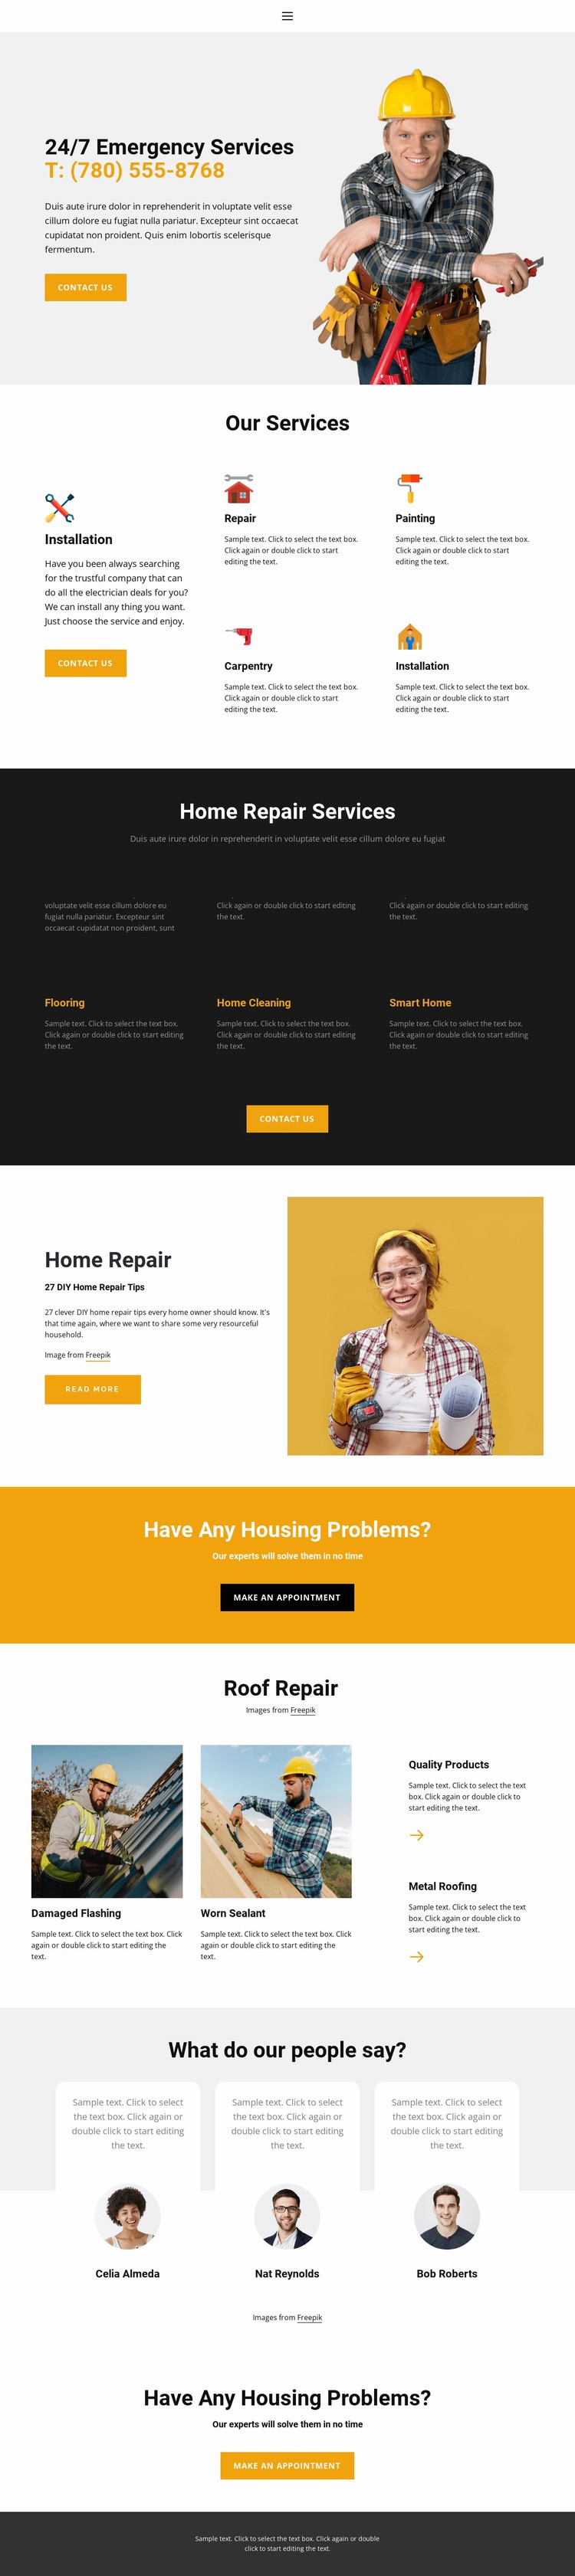 Solving household problems Web Page Design